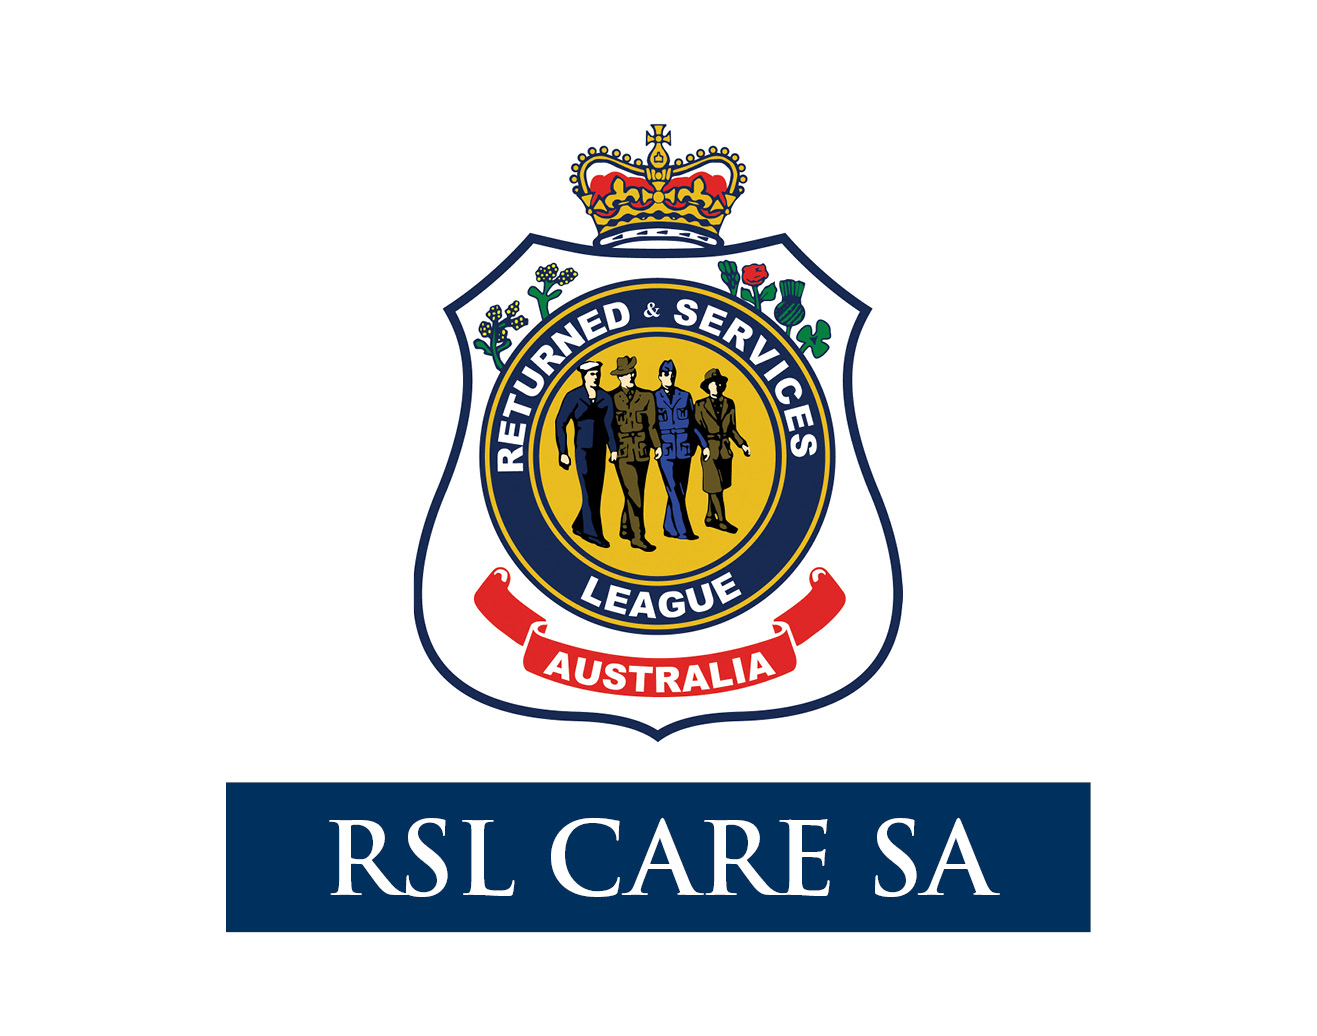 Looking forward to our next 100 Years at RSL Care SA